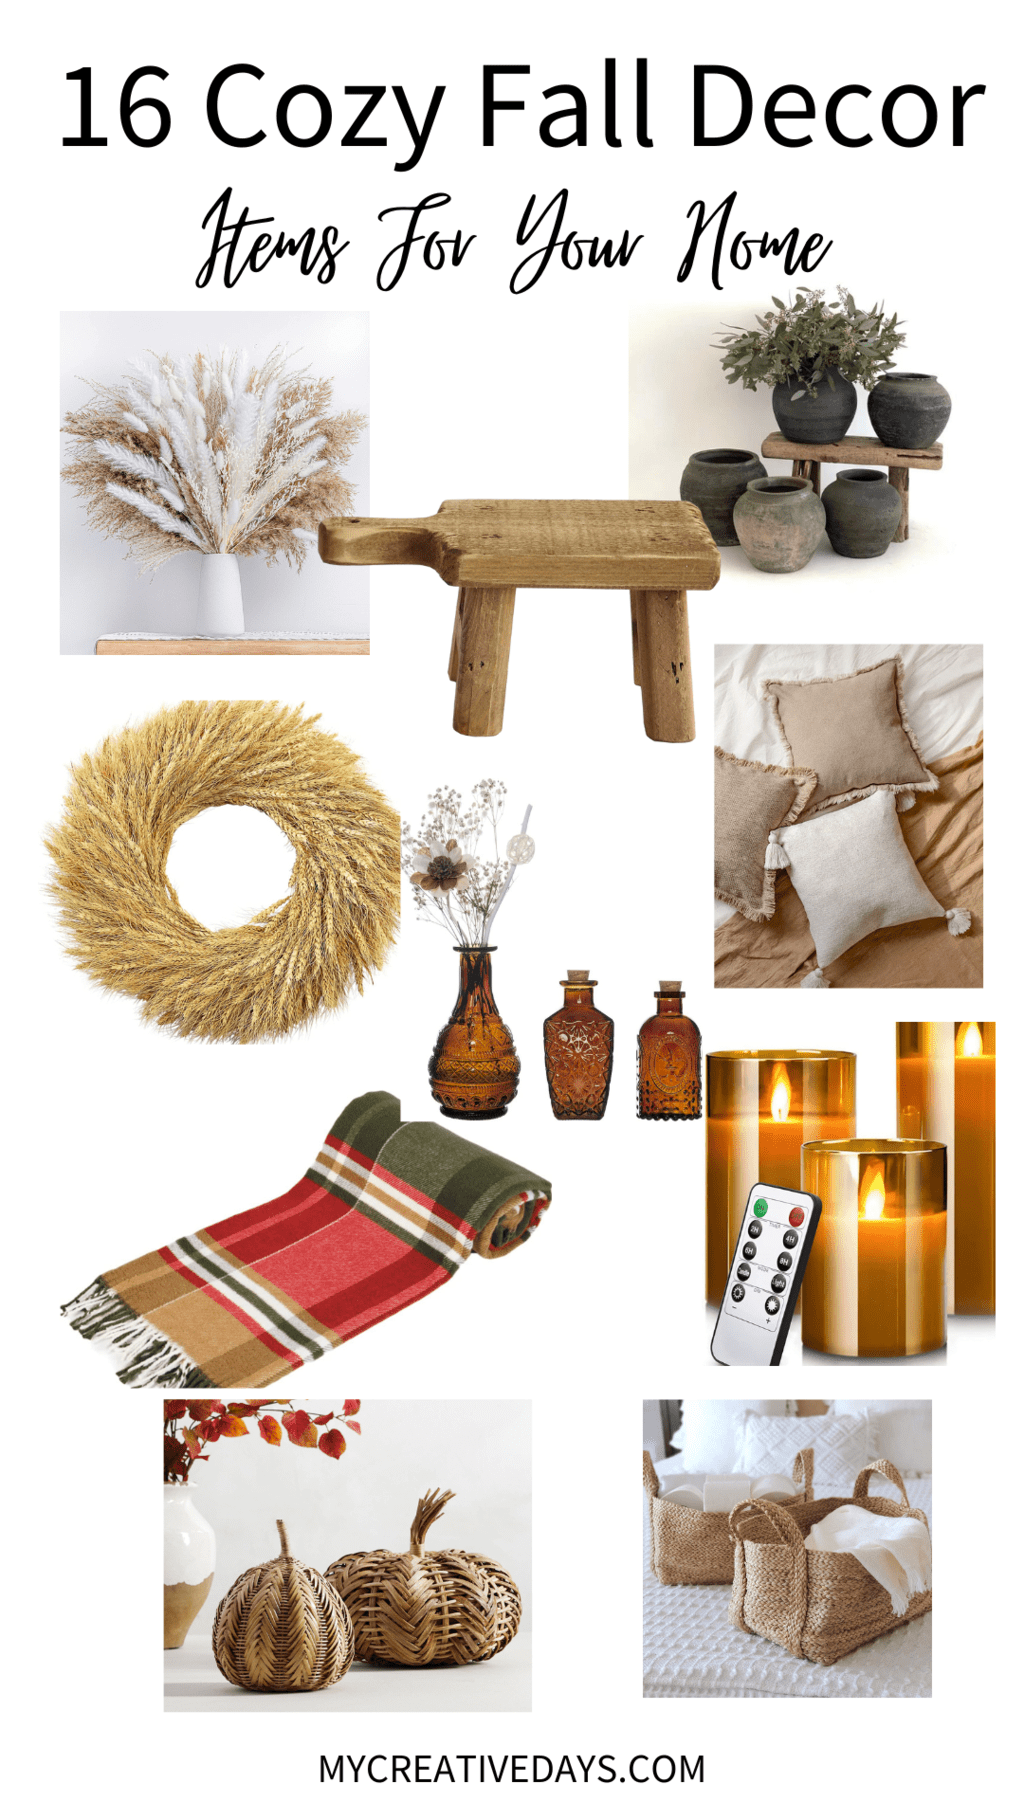 These cozy fall decor items will welcome the autumn season into your home in a simple, subtle way to create warm and comfy spaces.